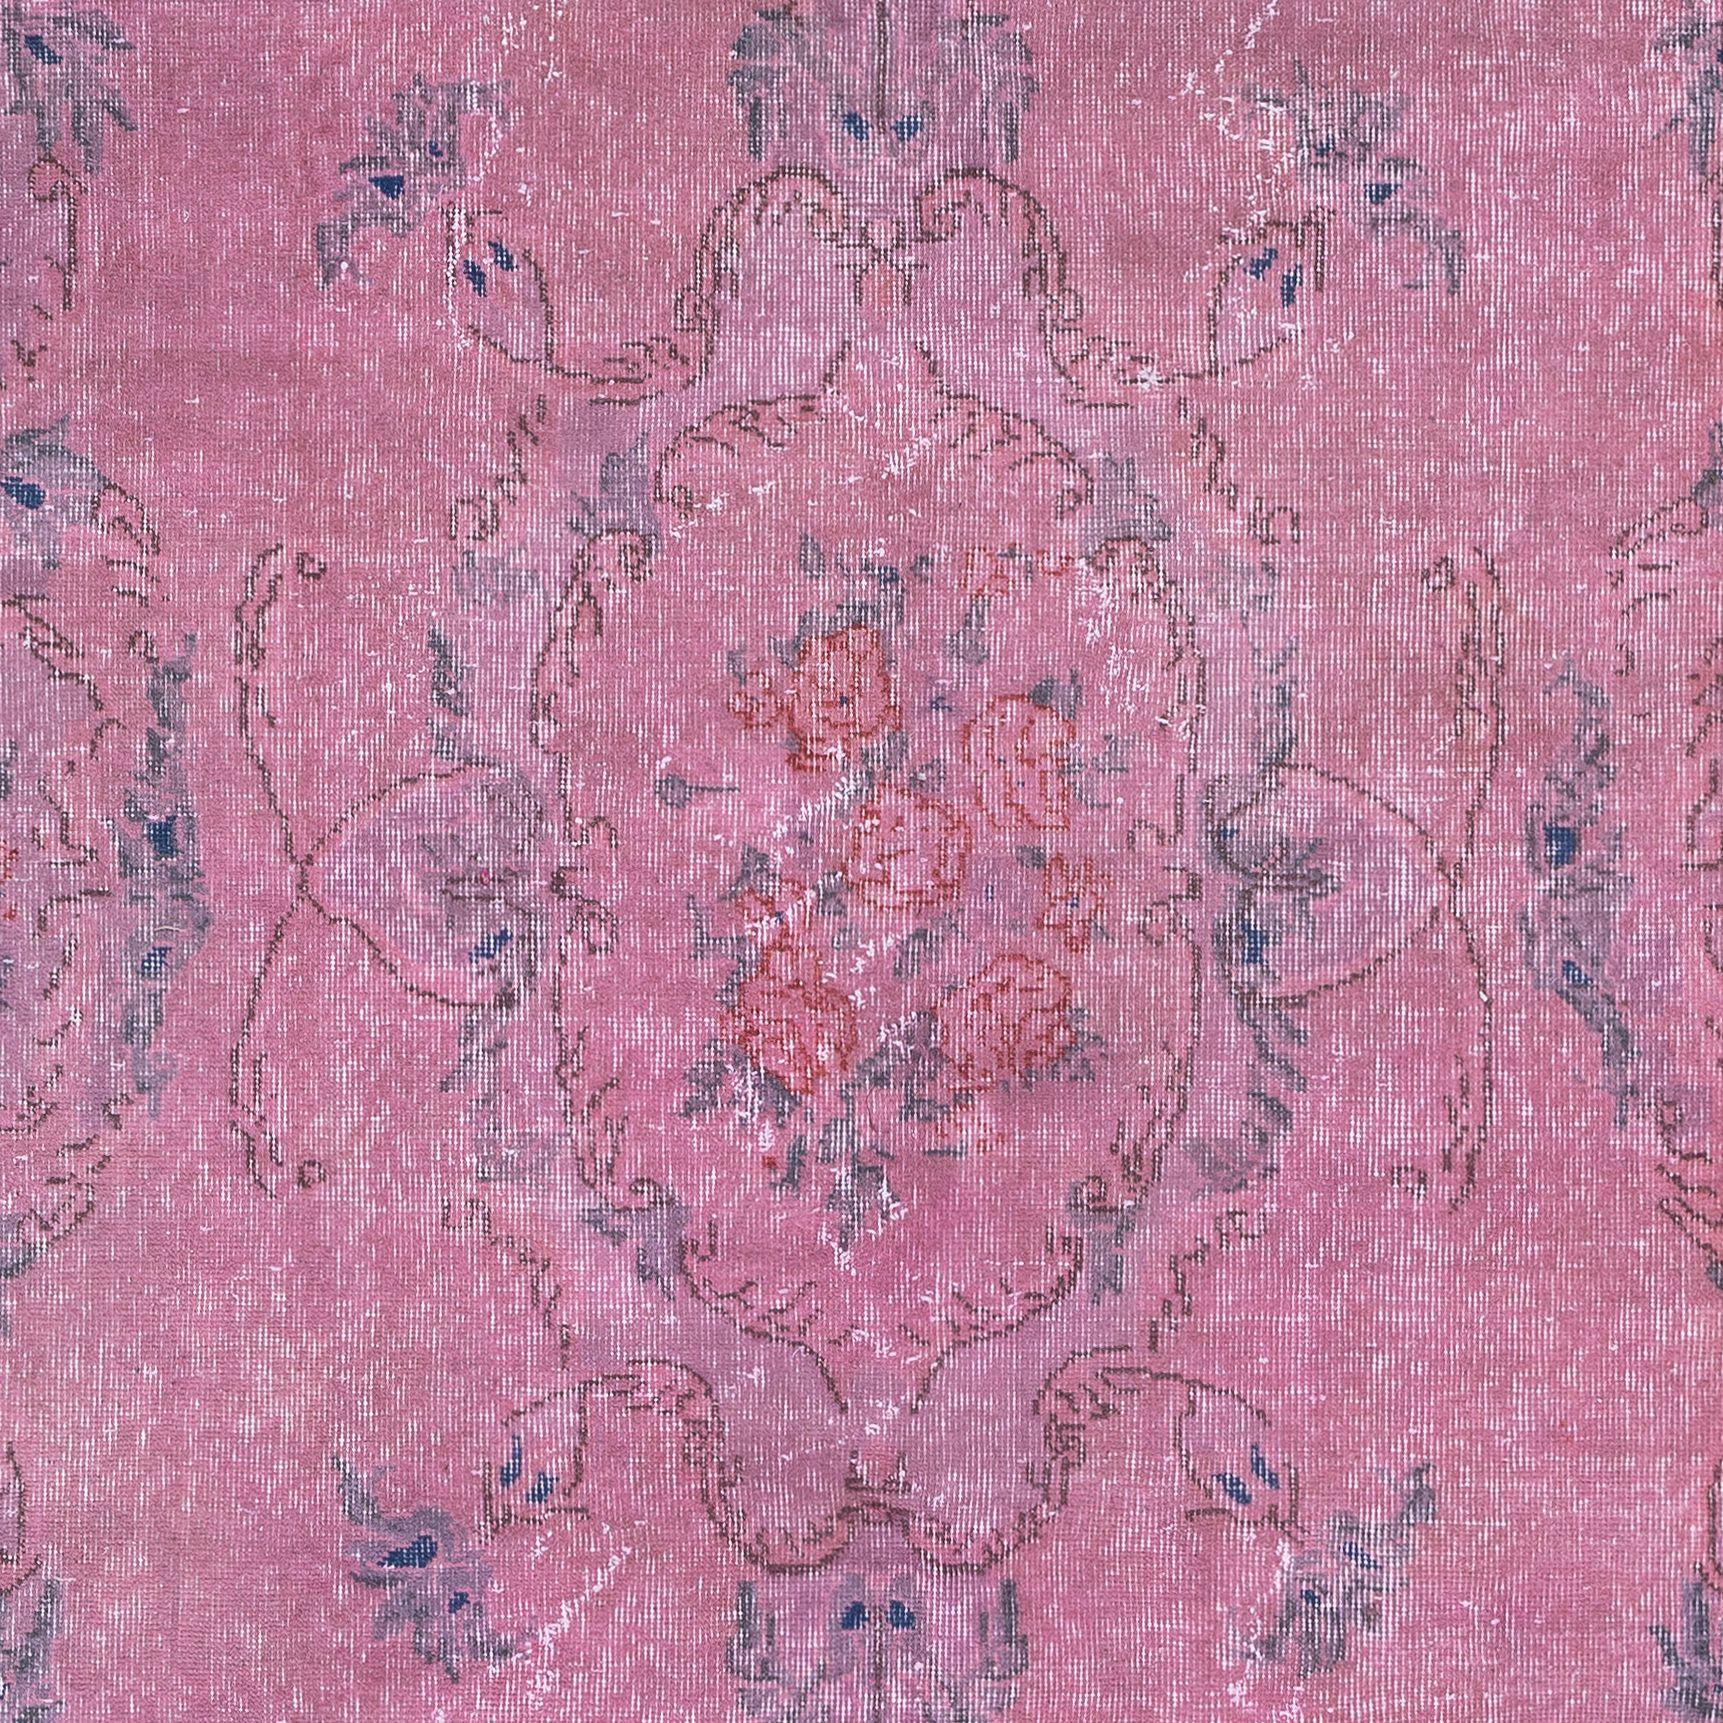 Modern 5.4x8.8 Ft Contemporary Handmade Turkish Floral Pattern Area Rug in Soft Pink For Sale